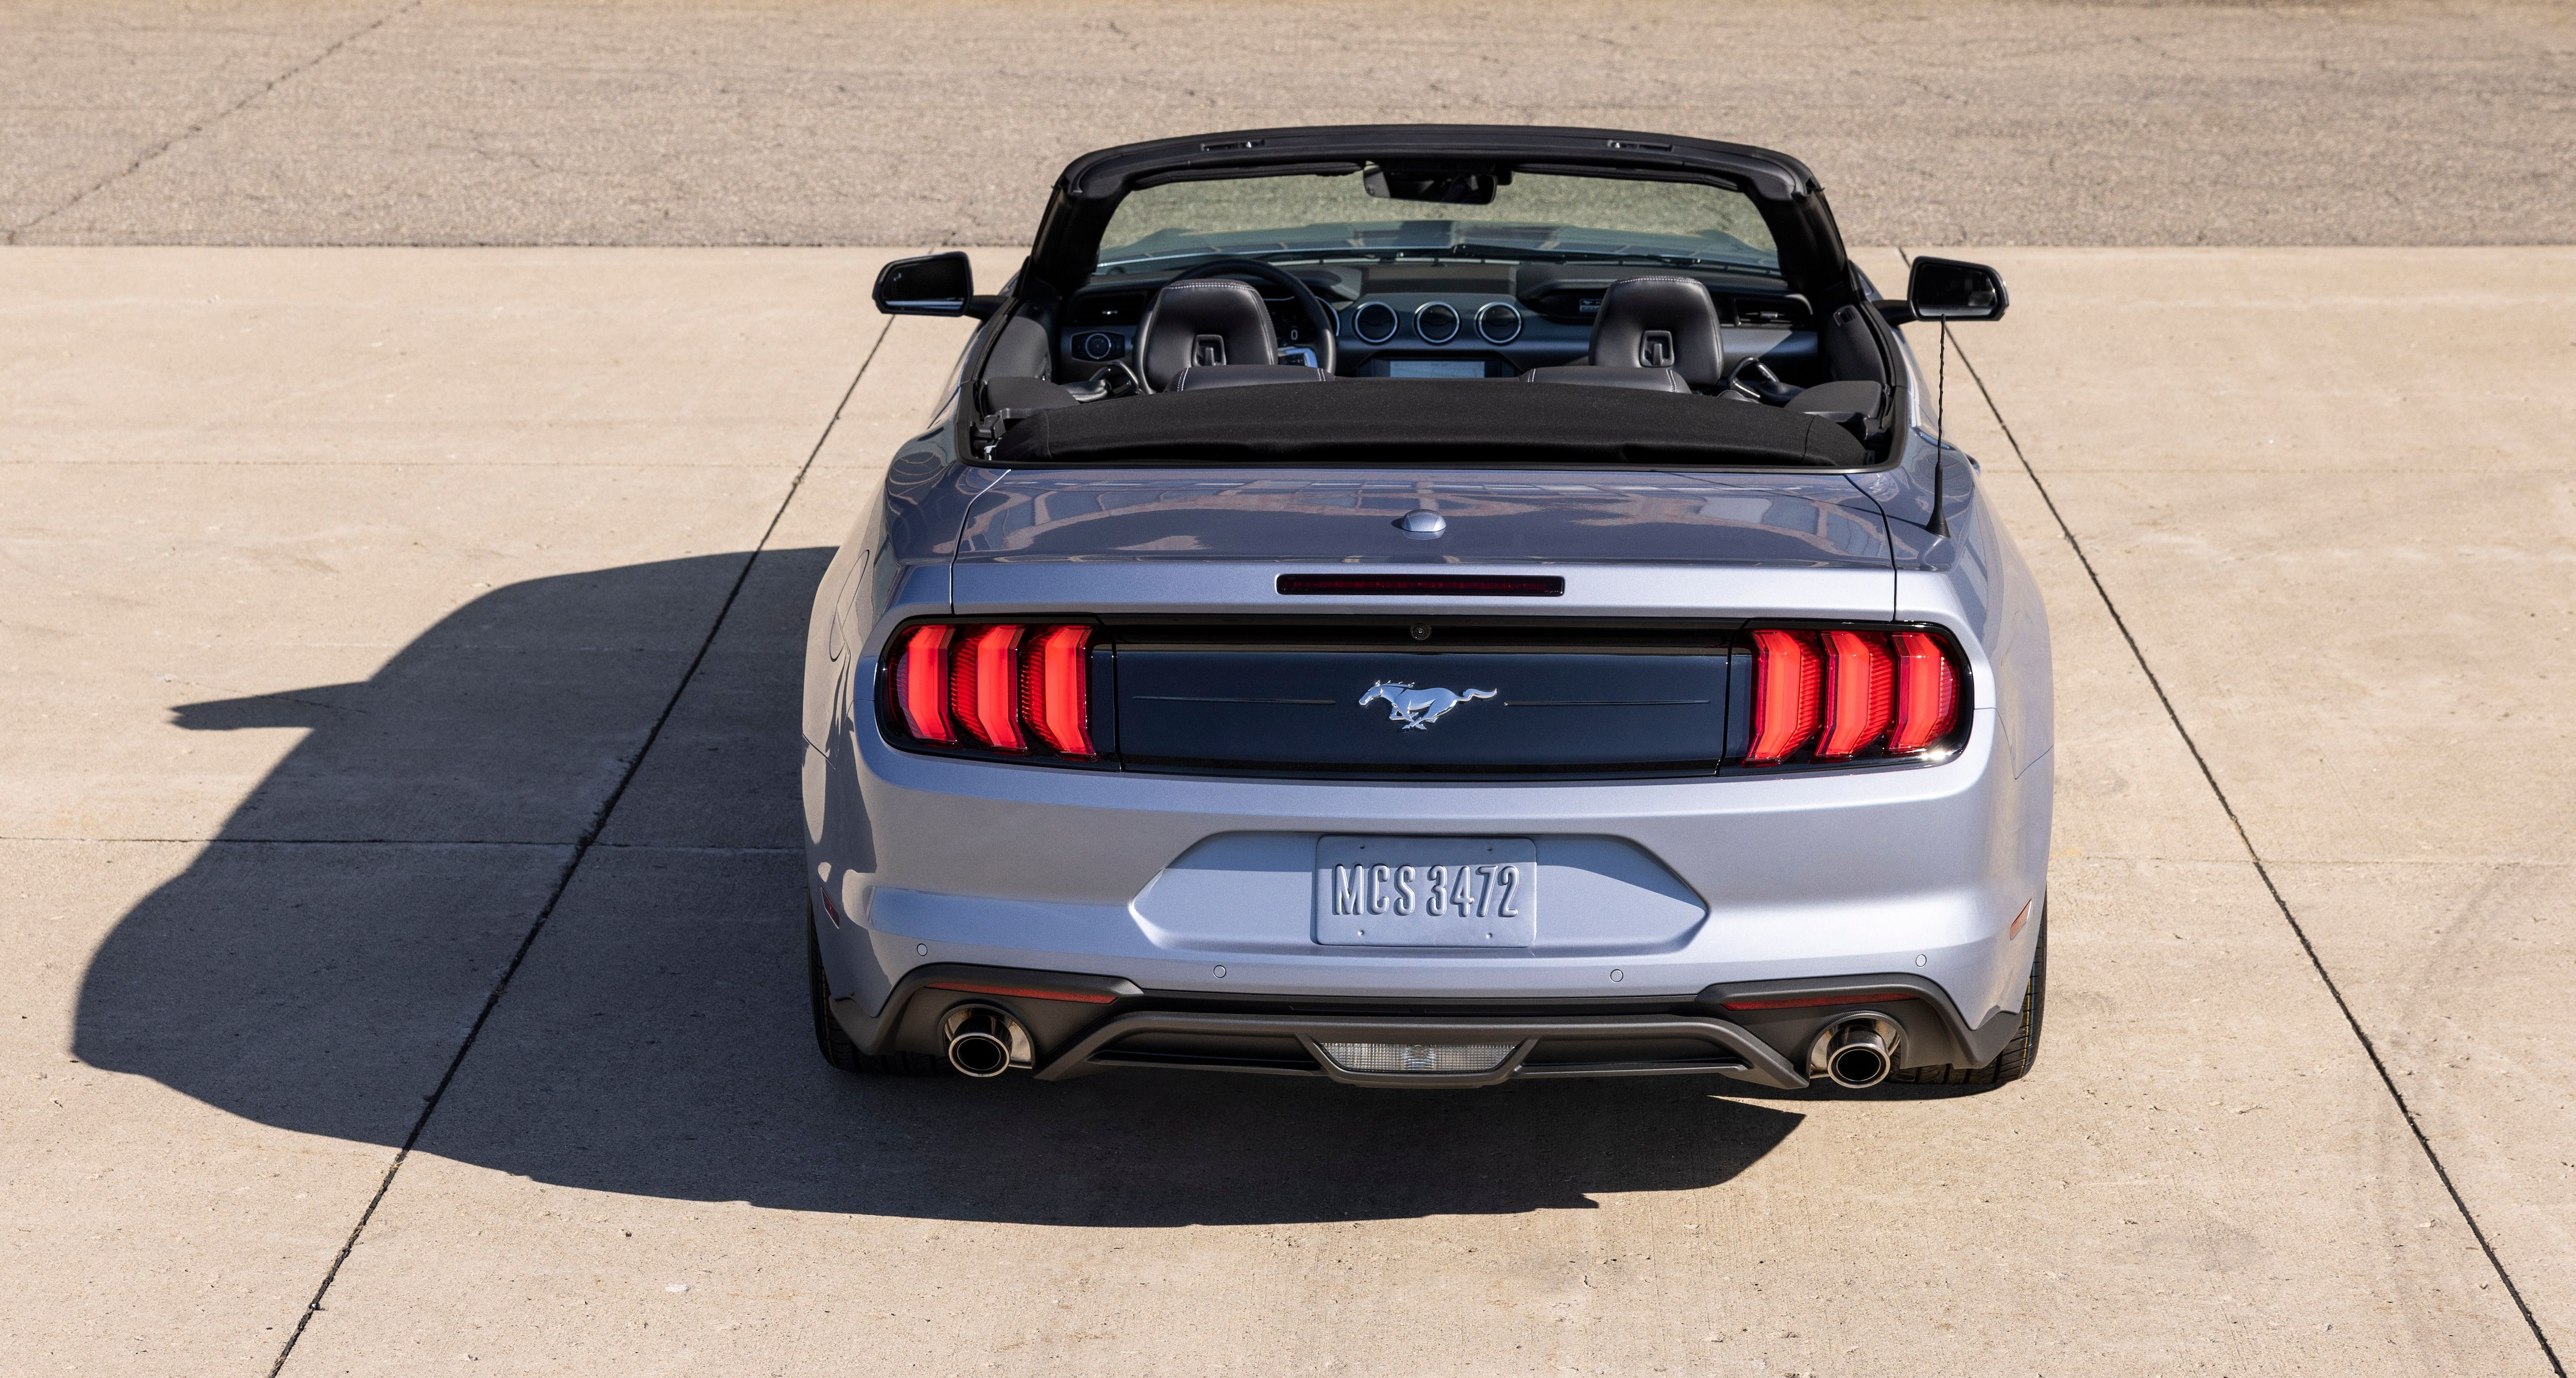 Rear image of a 2022 Mustang Coastal Limited Edition